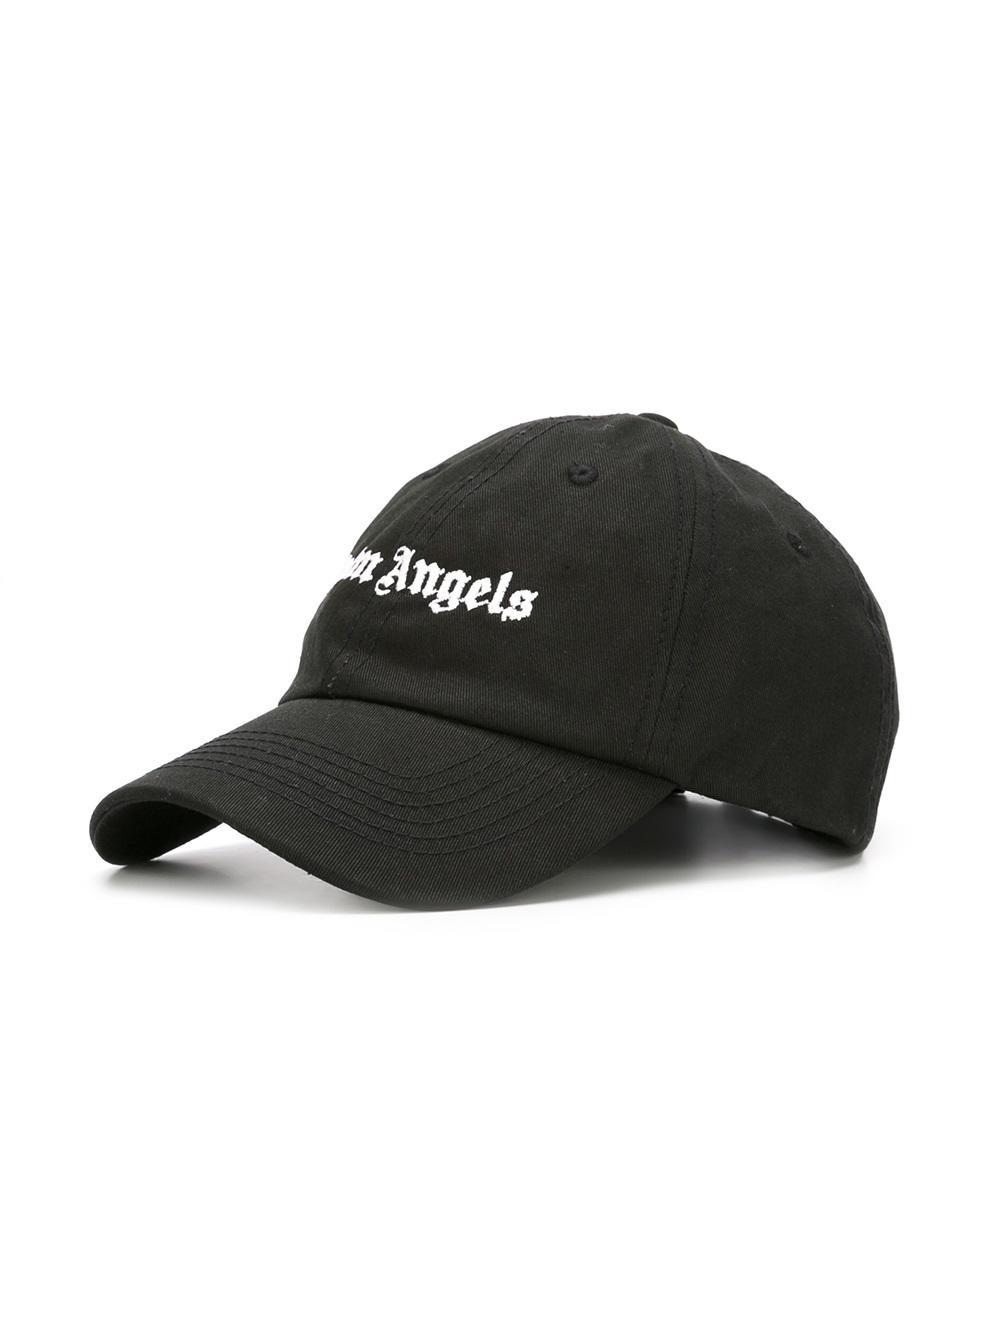 Palm Angels Cotton Logo Embroidered Cap in Black for Men - Lyst